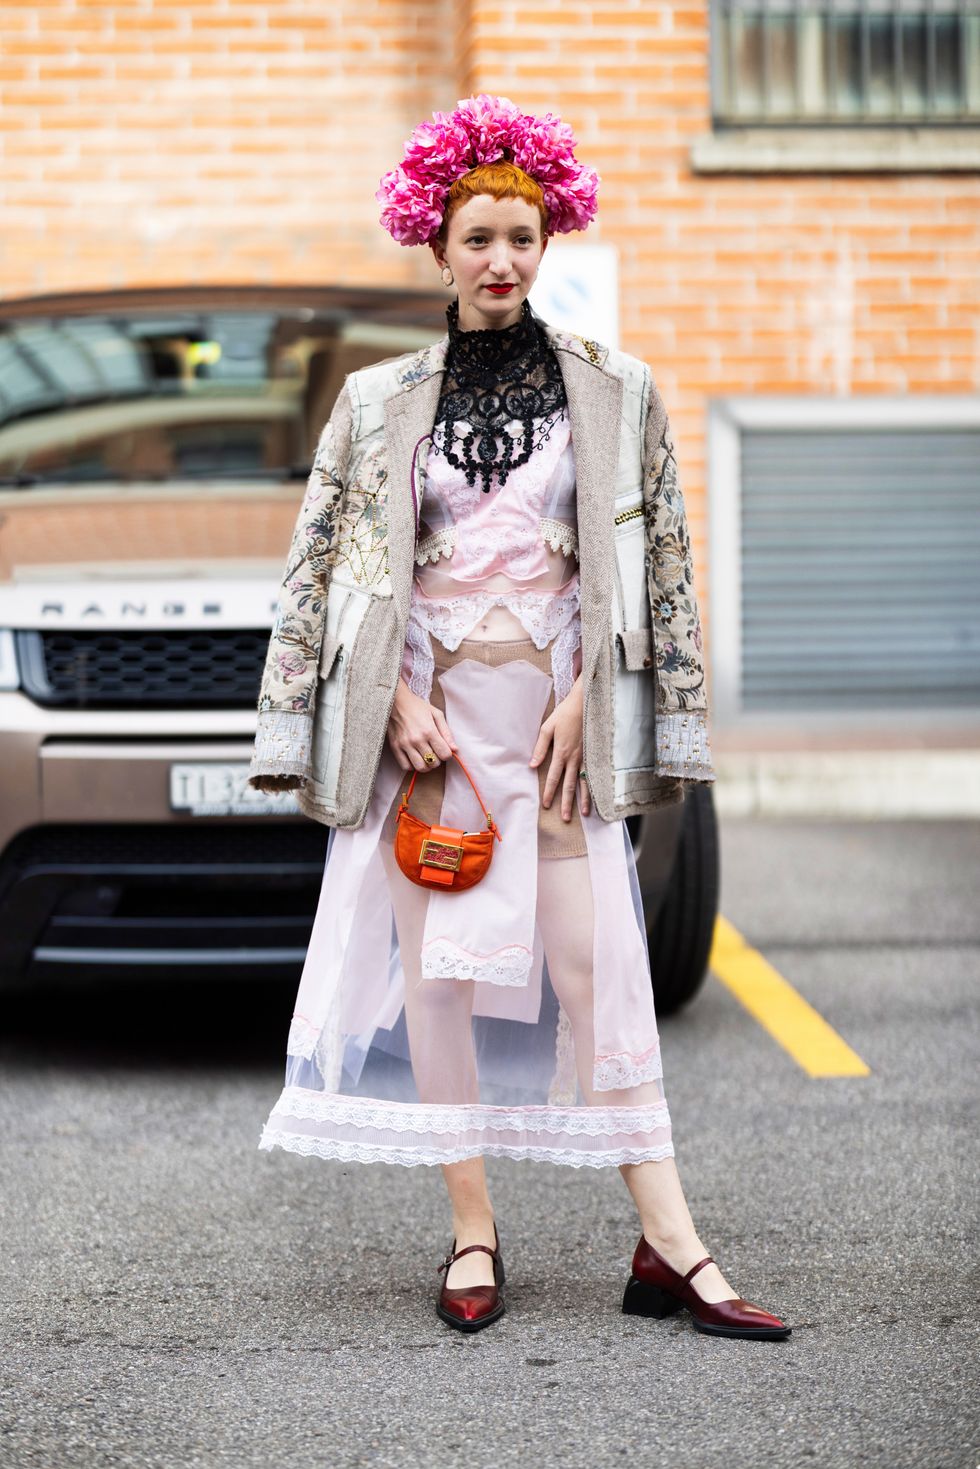 Judith Bradl is seen wearing an orange mini Fendi bag, red leather shoes, a pink flowers headpiece, a black lace collar, a multicolor beige printed blazer embellished with fabrics details and a see-through pink tulle dress embellished with lace details outside Antonio Marras show during the Milan Fashion Week